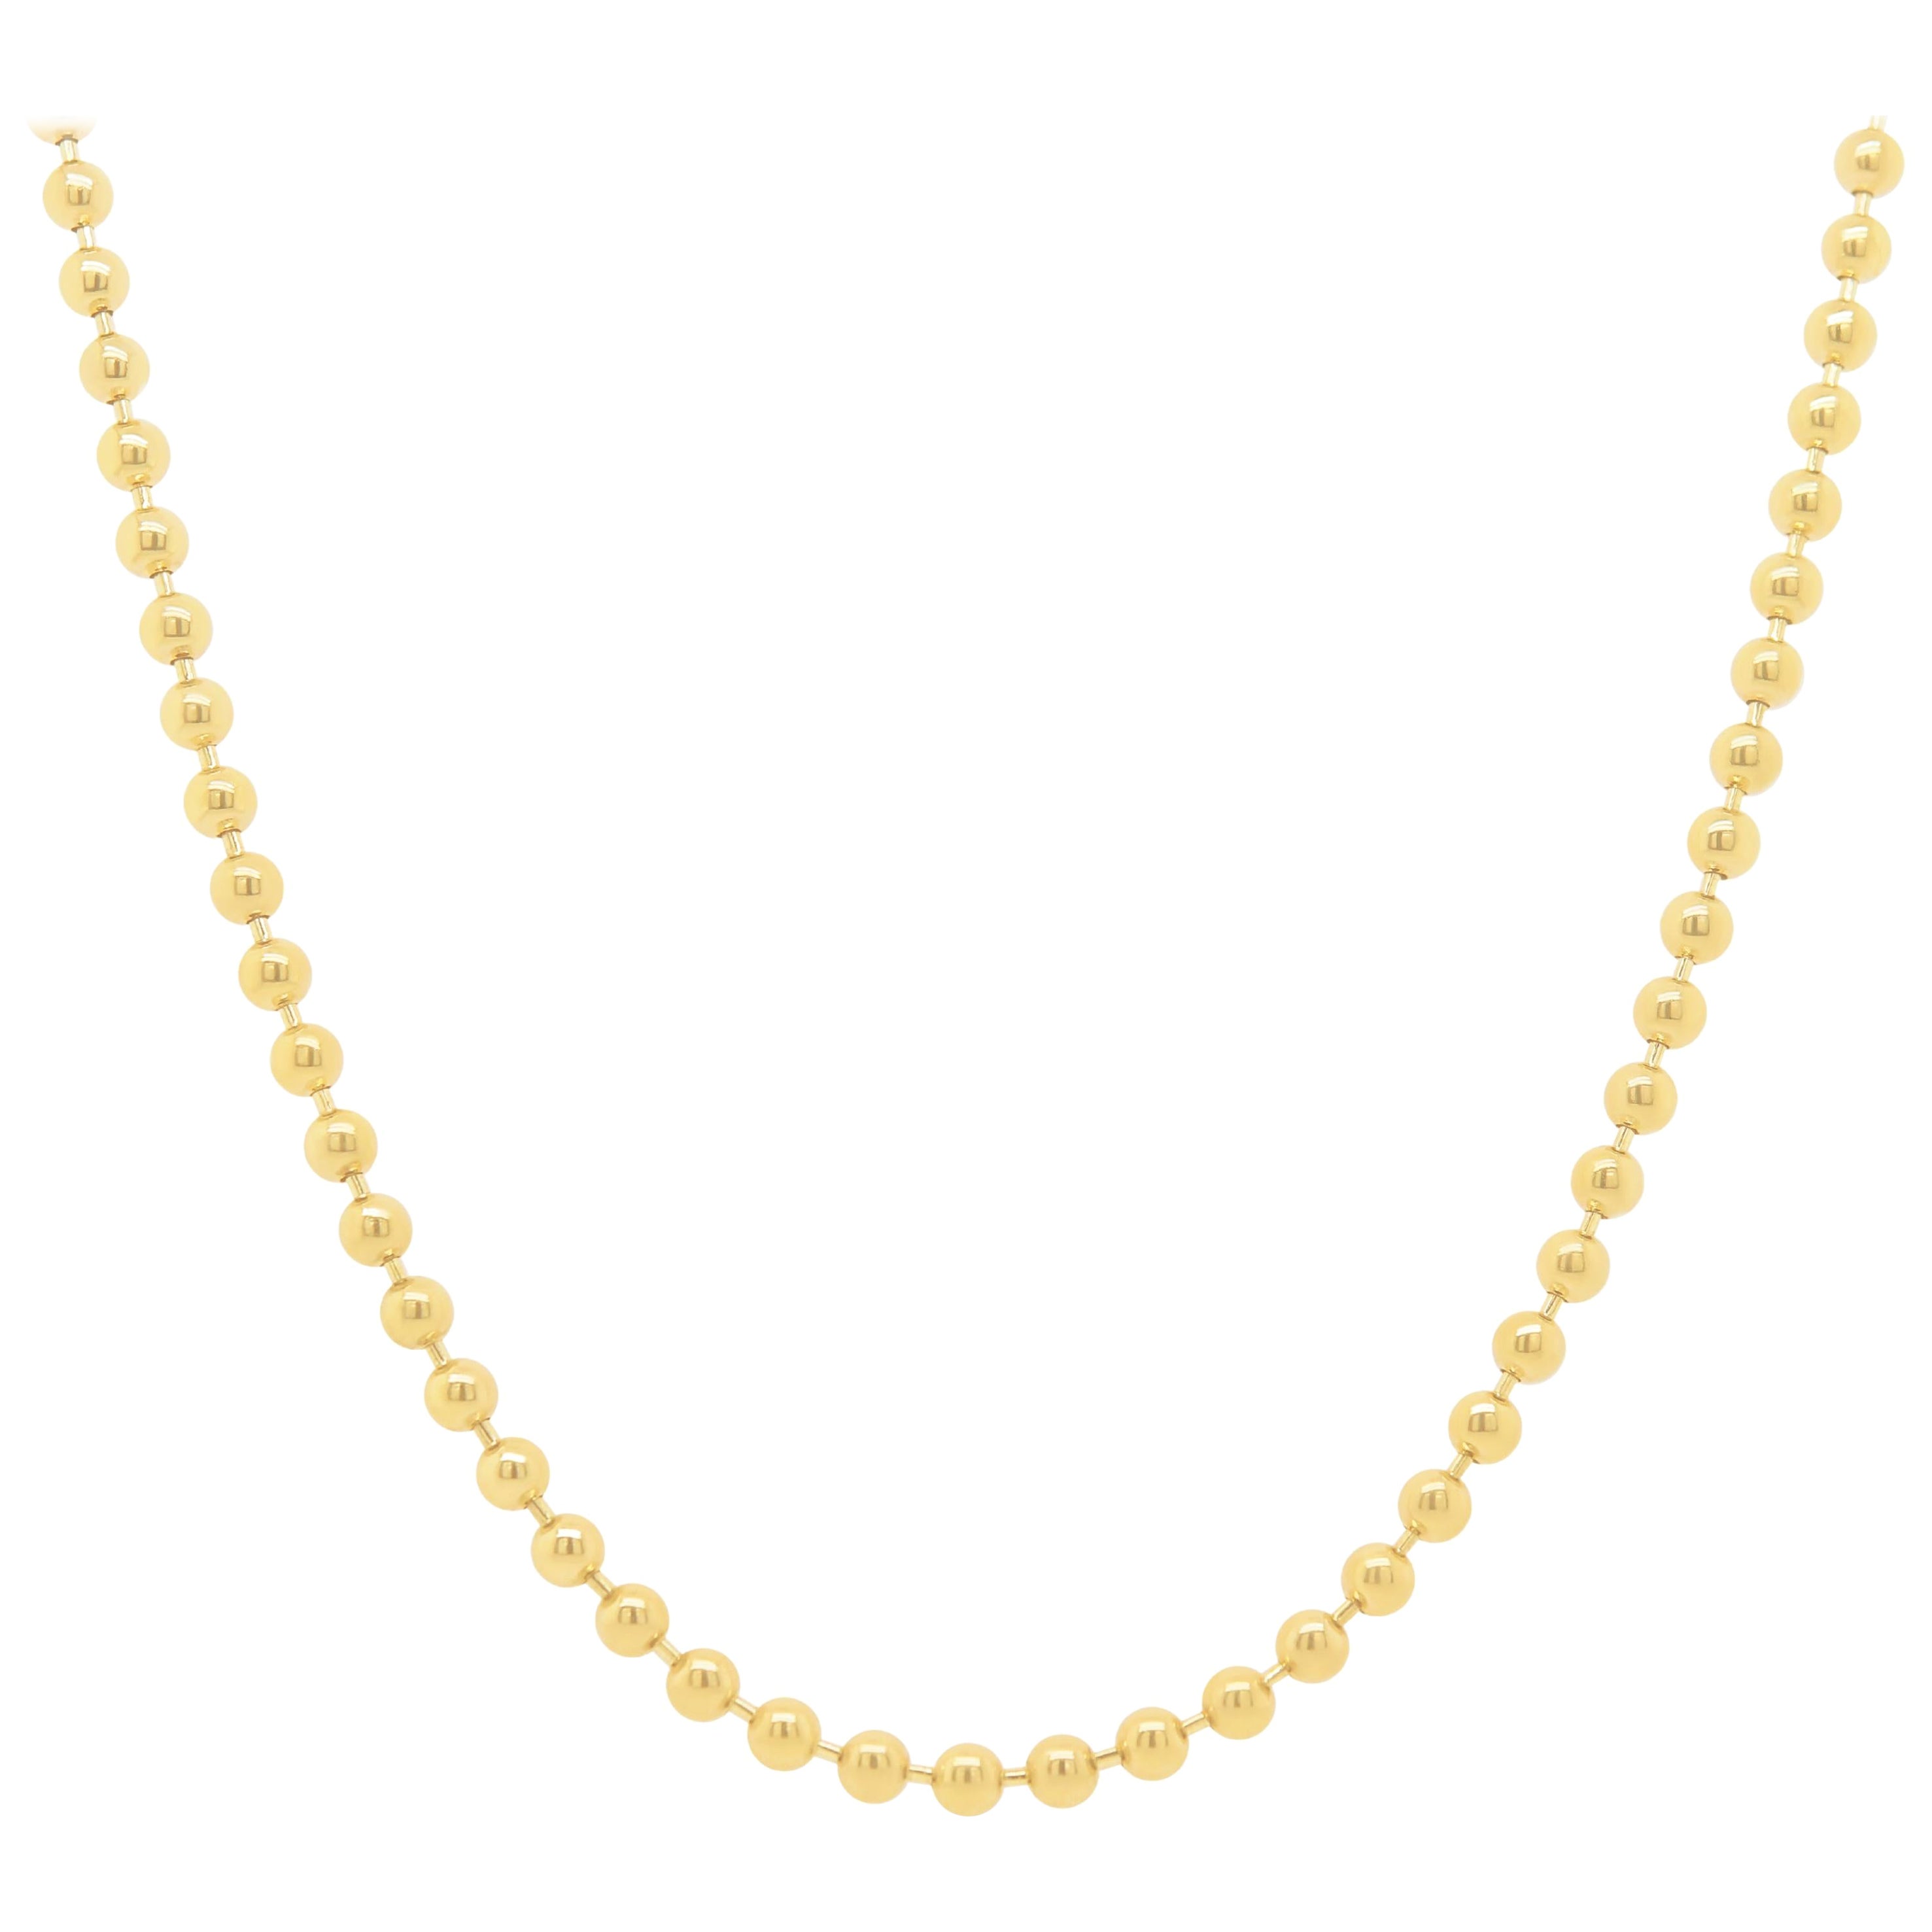 Gold Ball Bead Necklace Solid 14k Yellow Gold Layering Necklace Chain